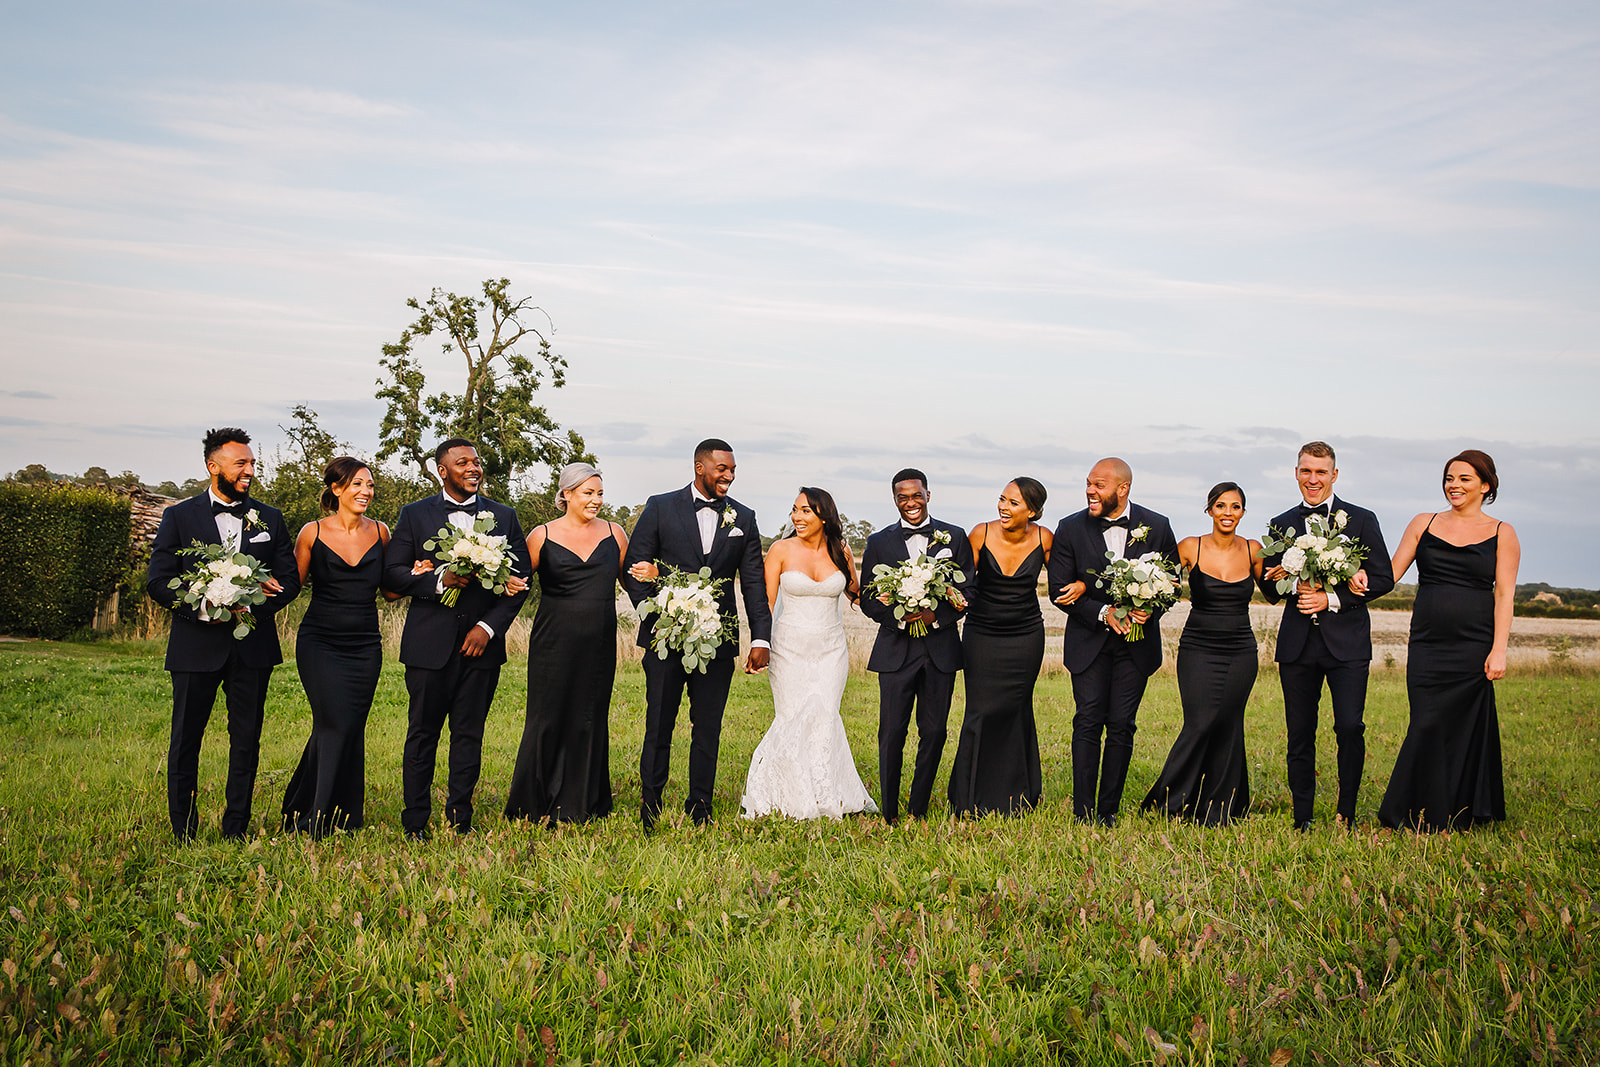 bridal party in tuxedos and black dresses